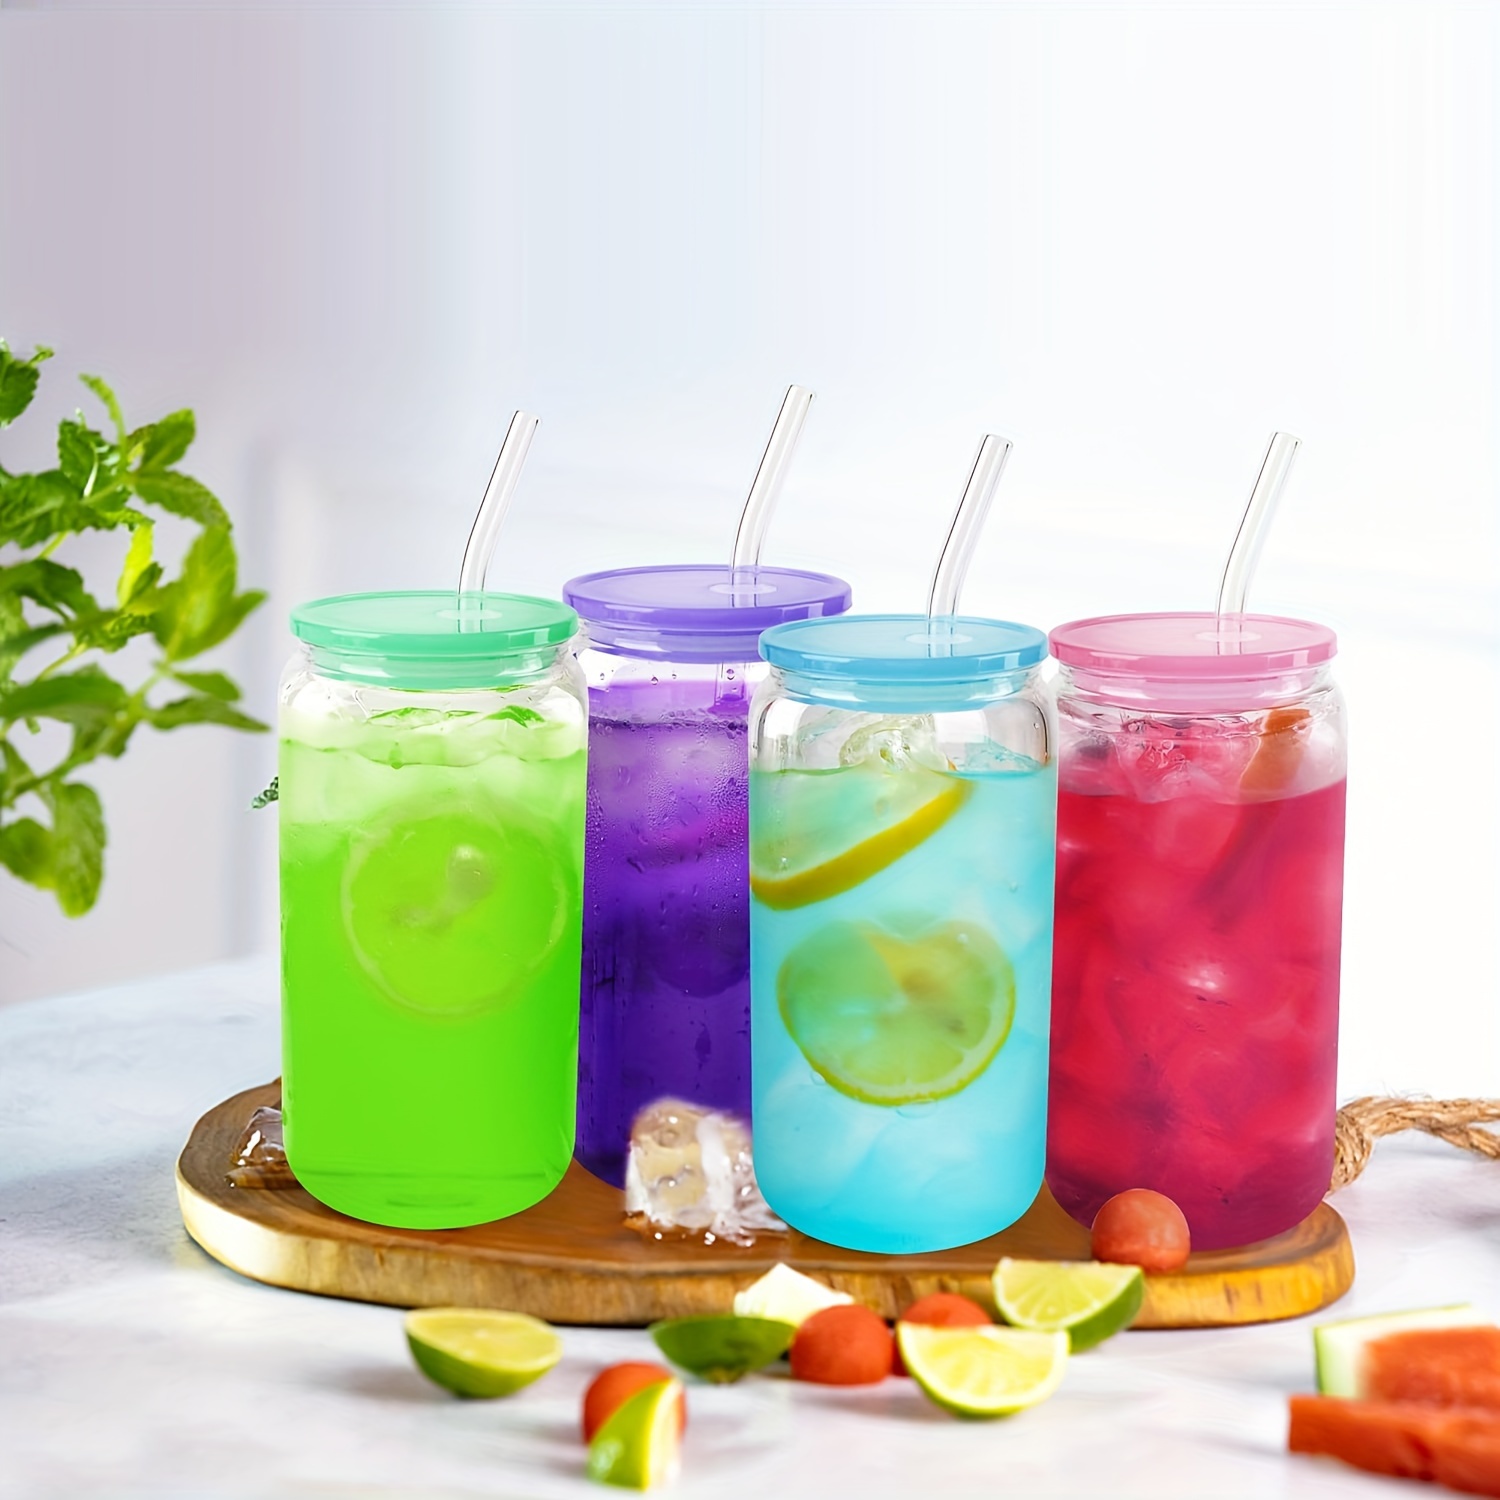 Acrylic Tumbler Set of 6 with Lids, Straws and Freezable Ice Cubes